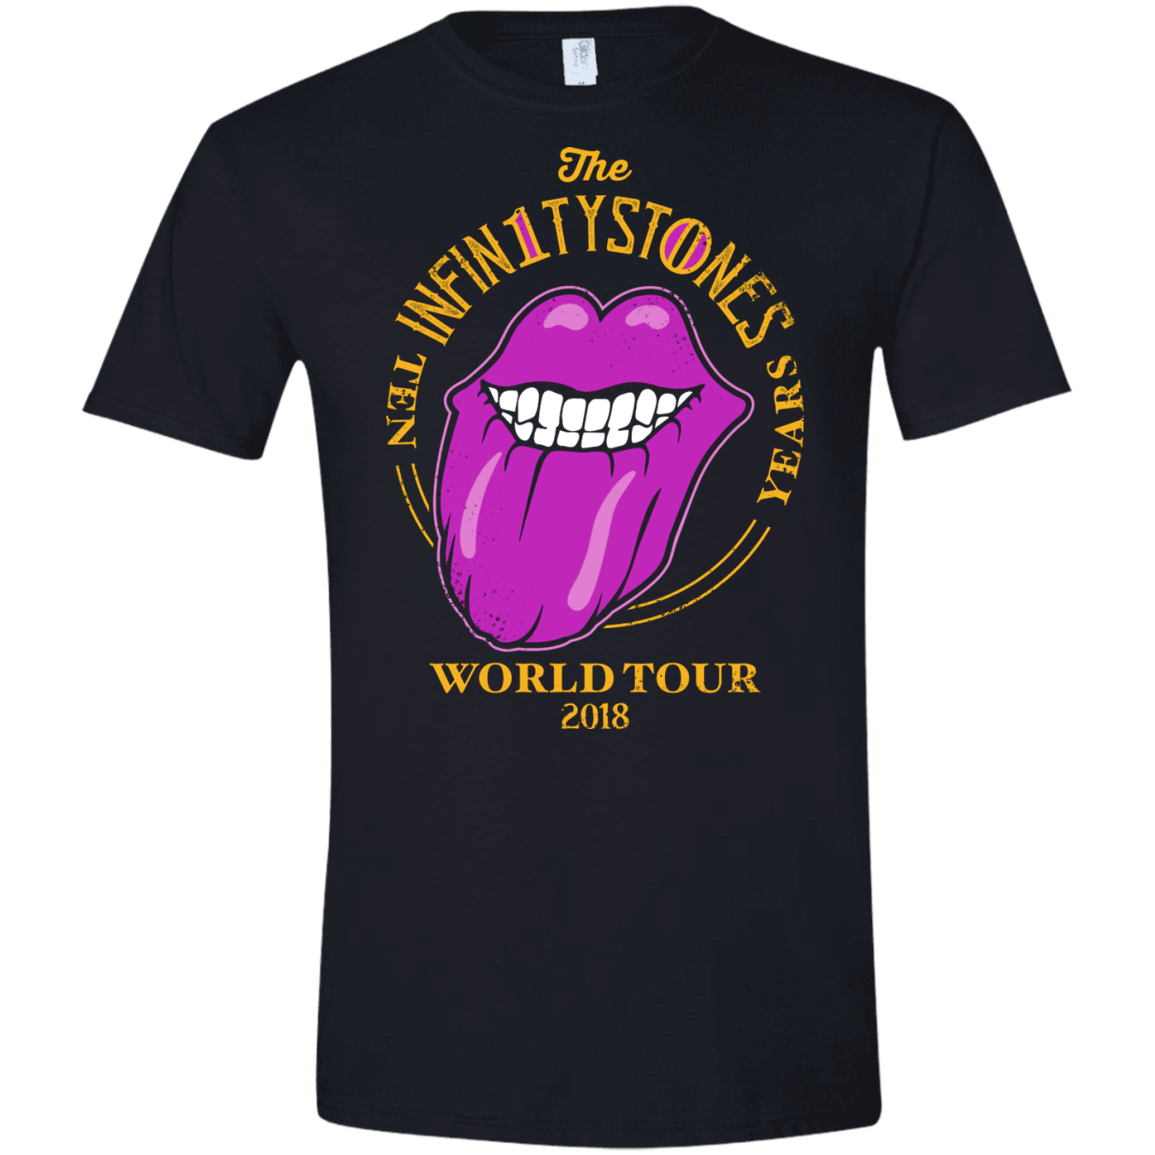 T-Shirts Black / X-Small Stones World Tour Men's Semi-Fitted Softstyle